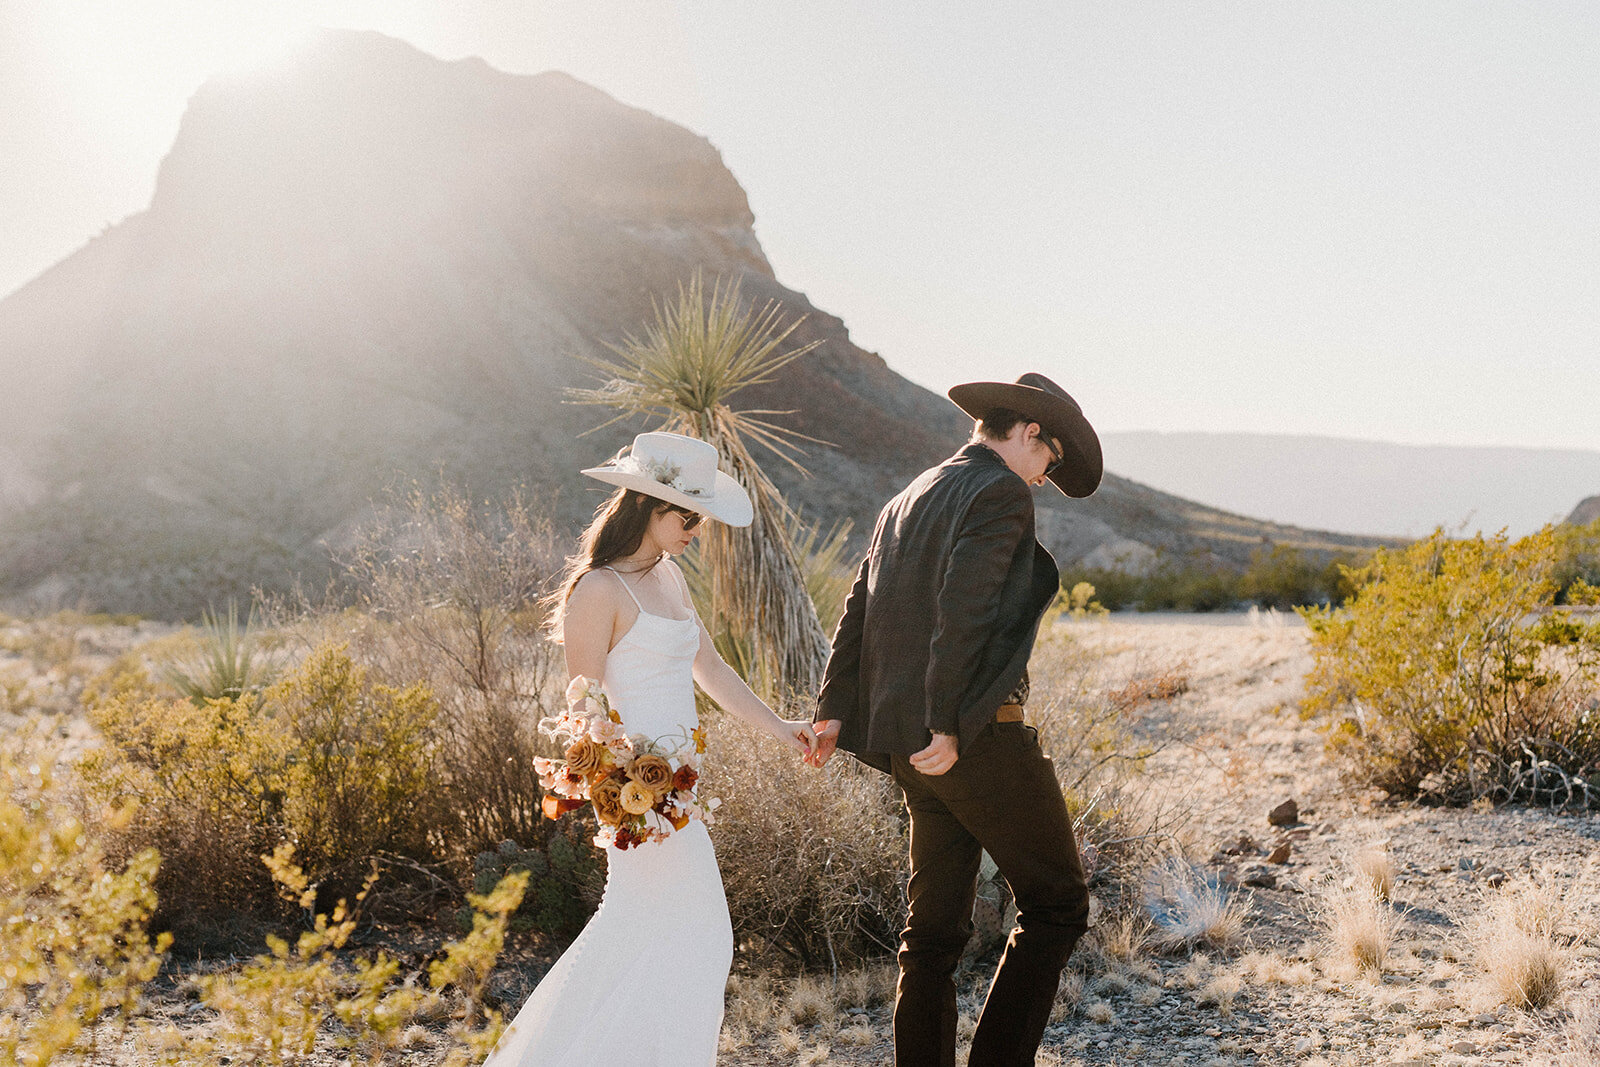 A couple walking through the desert in West Texas, eloping and holding a bouquet of flowers.